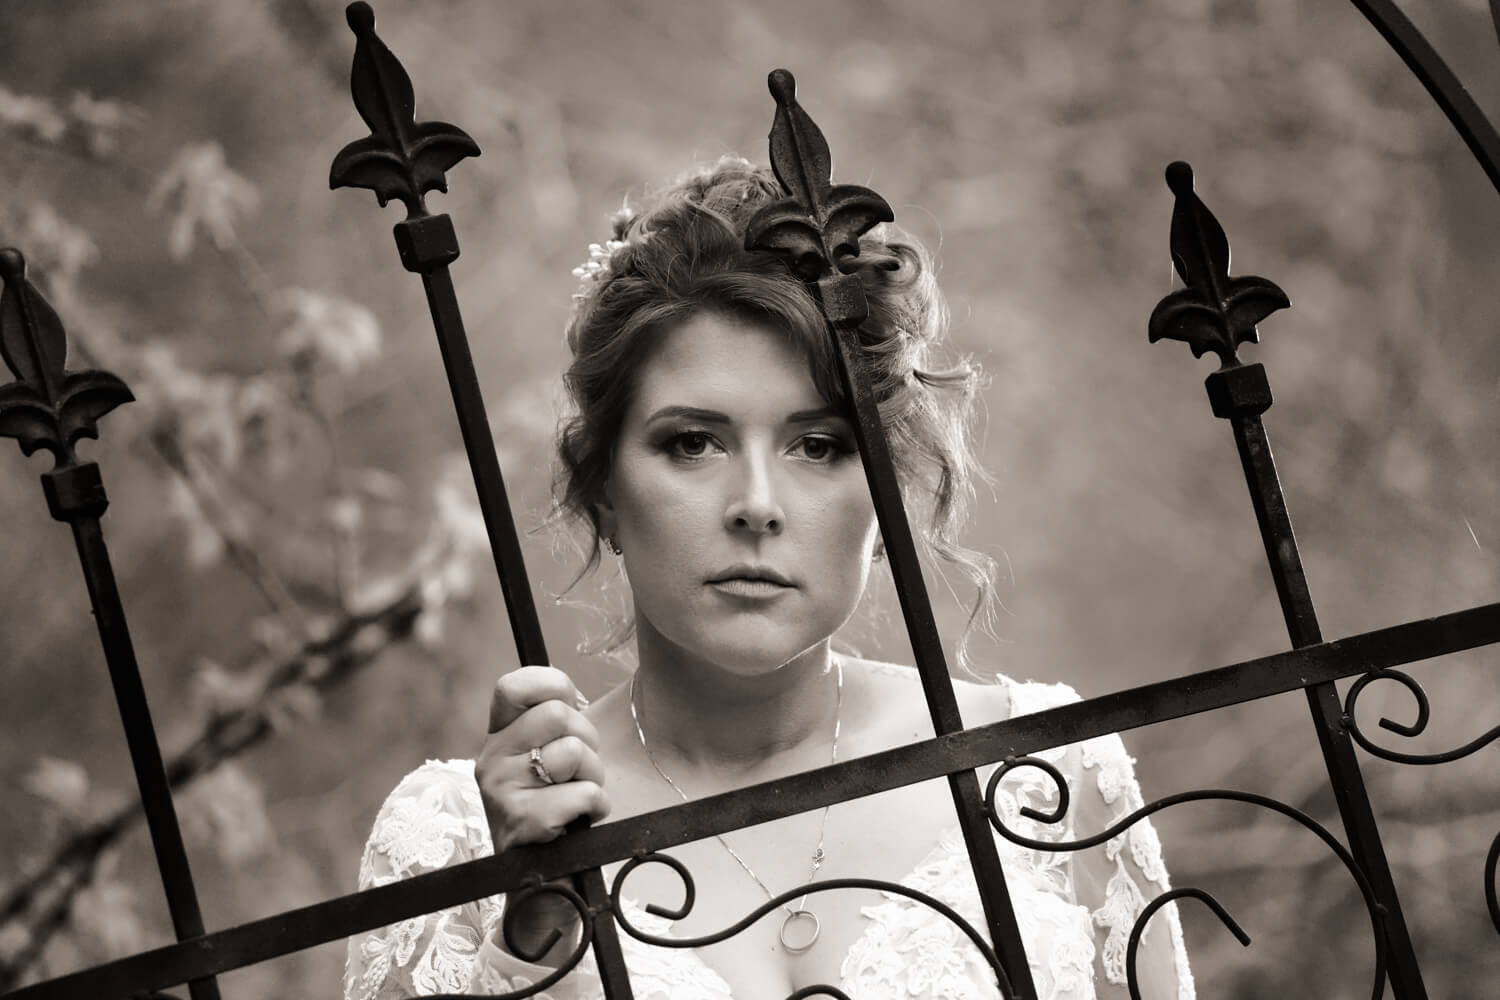 Black and white portrait of a bride standing behind an iron fence